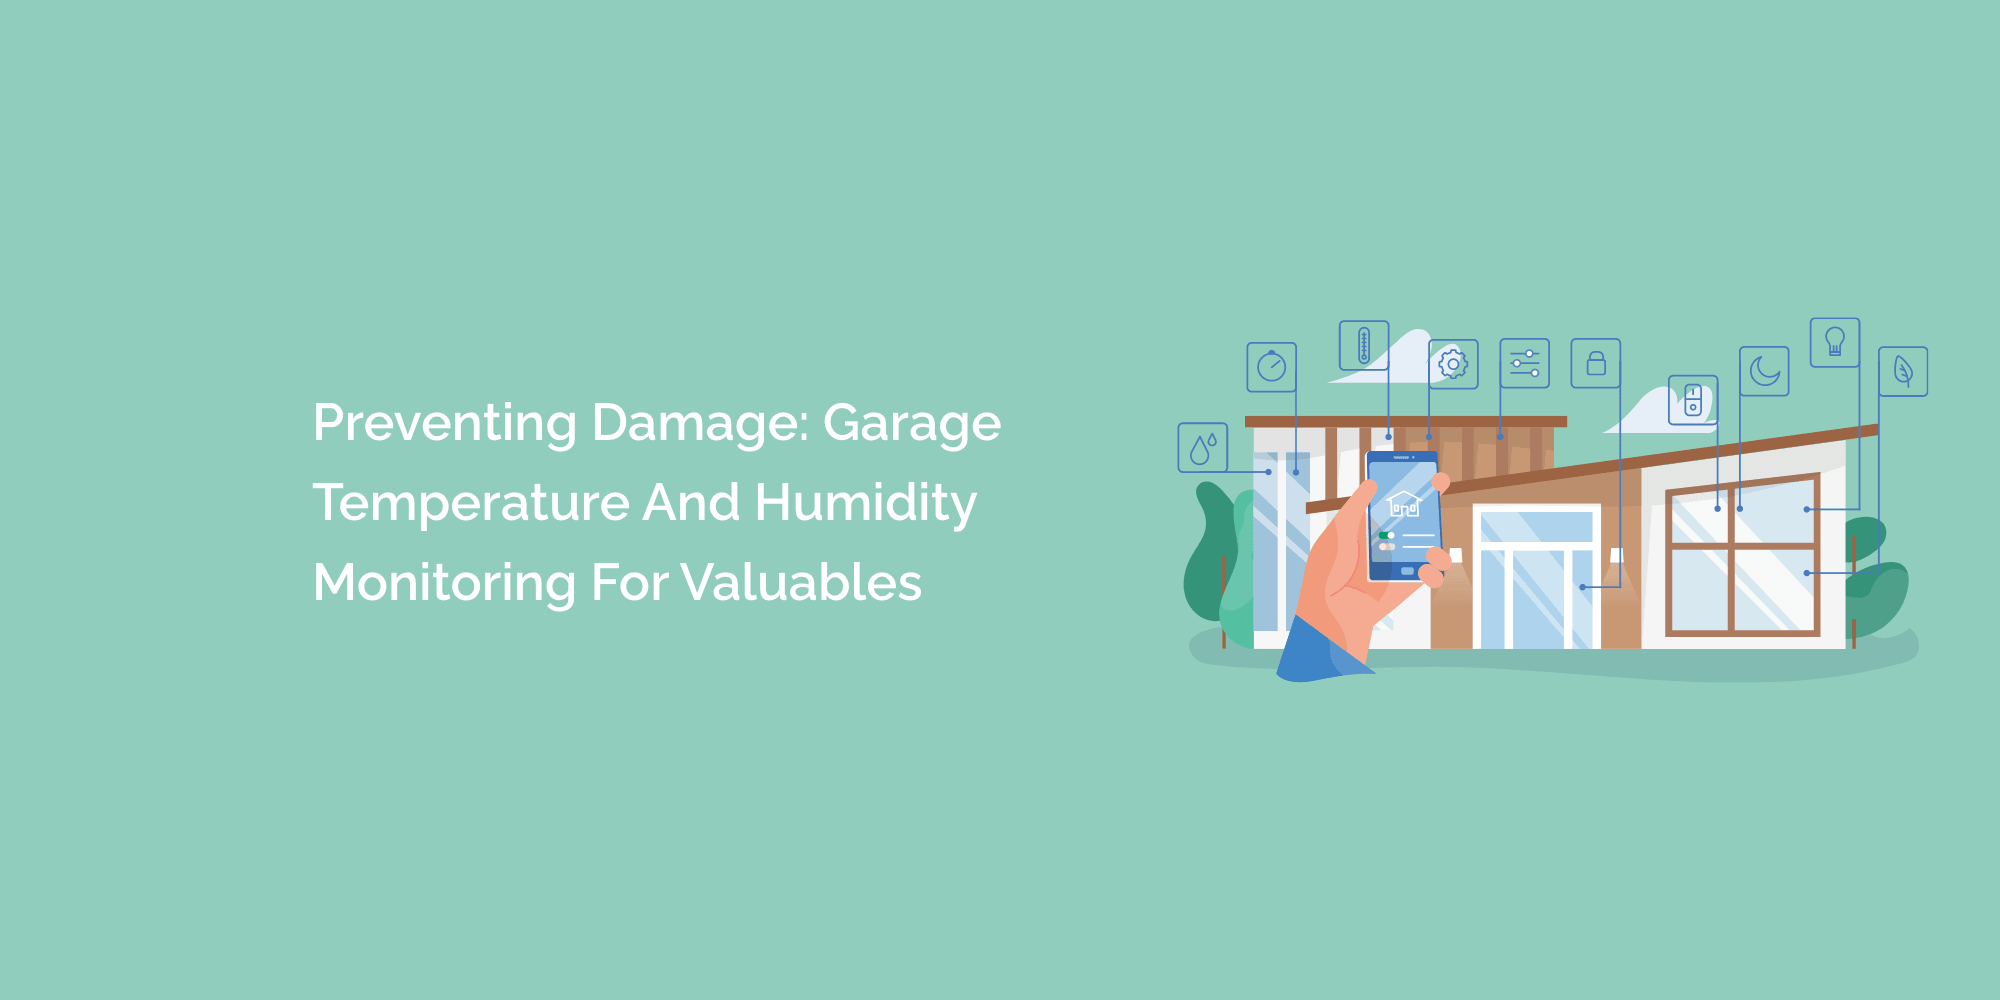 Preventing Damage: Garage Temperature and Humidity Monitoring for Valuables